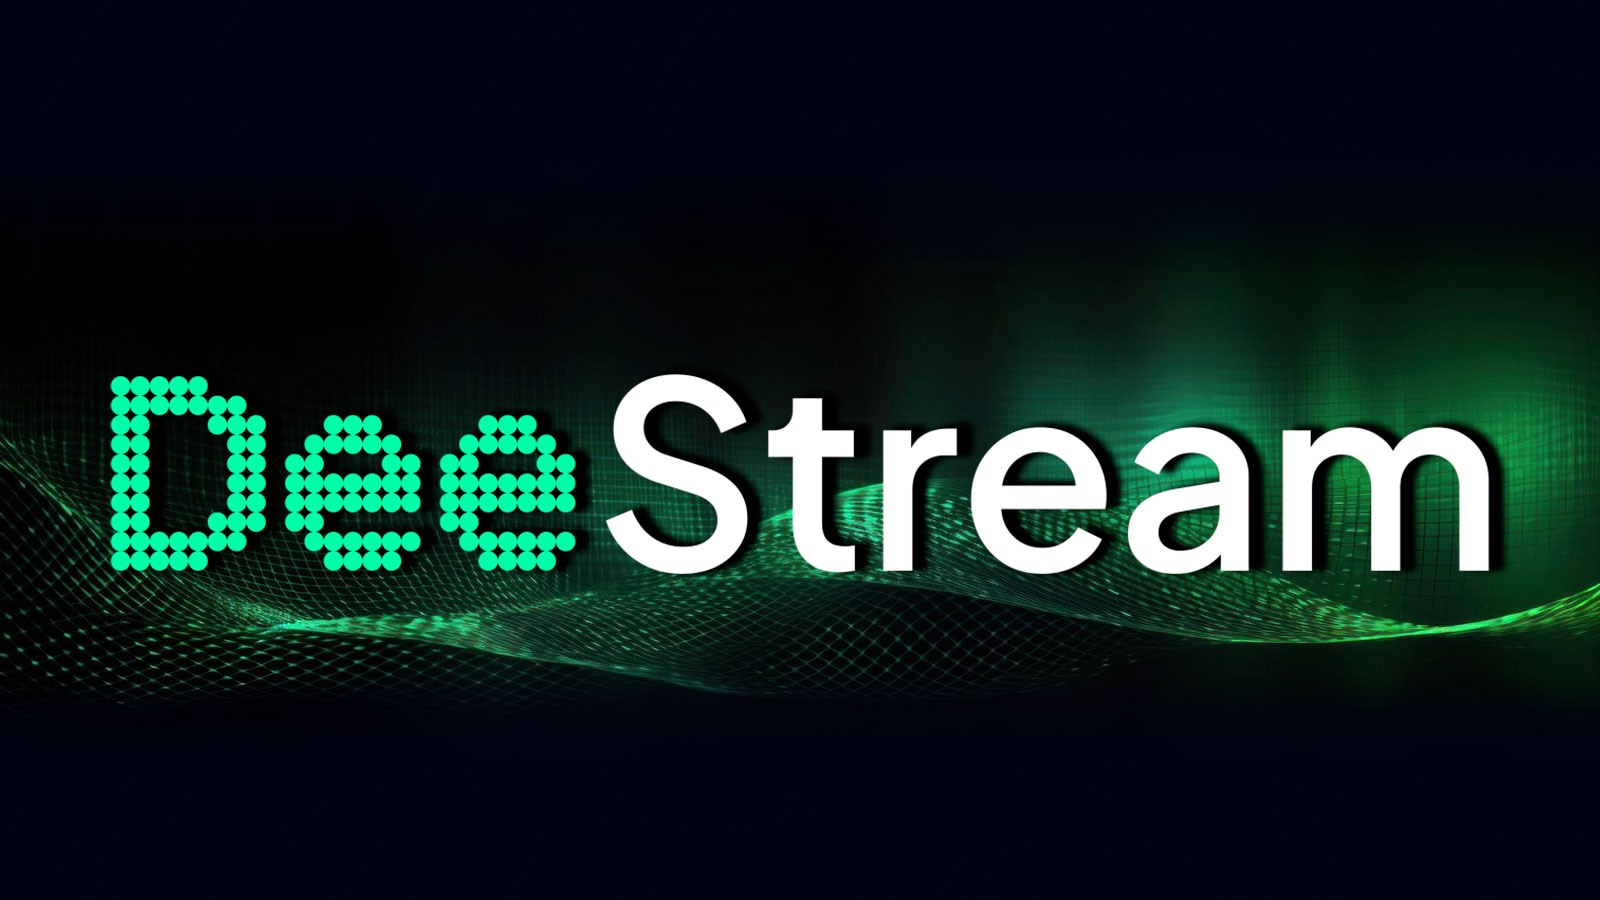 DeeStream (DST) Cryptocurrency Sale Welcomed by Community in Q1, 2024 as Filecoin (FIL) and Ethereum (ETH) Reach Trading Volume Highs